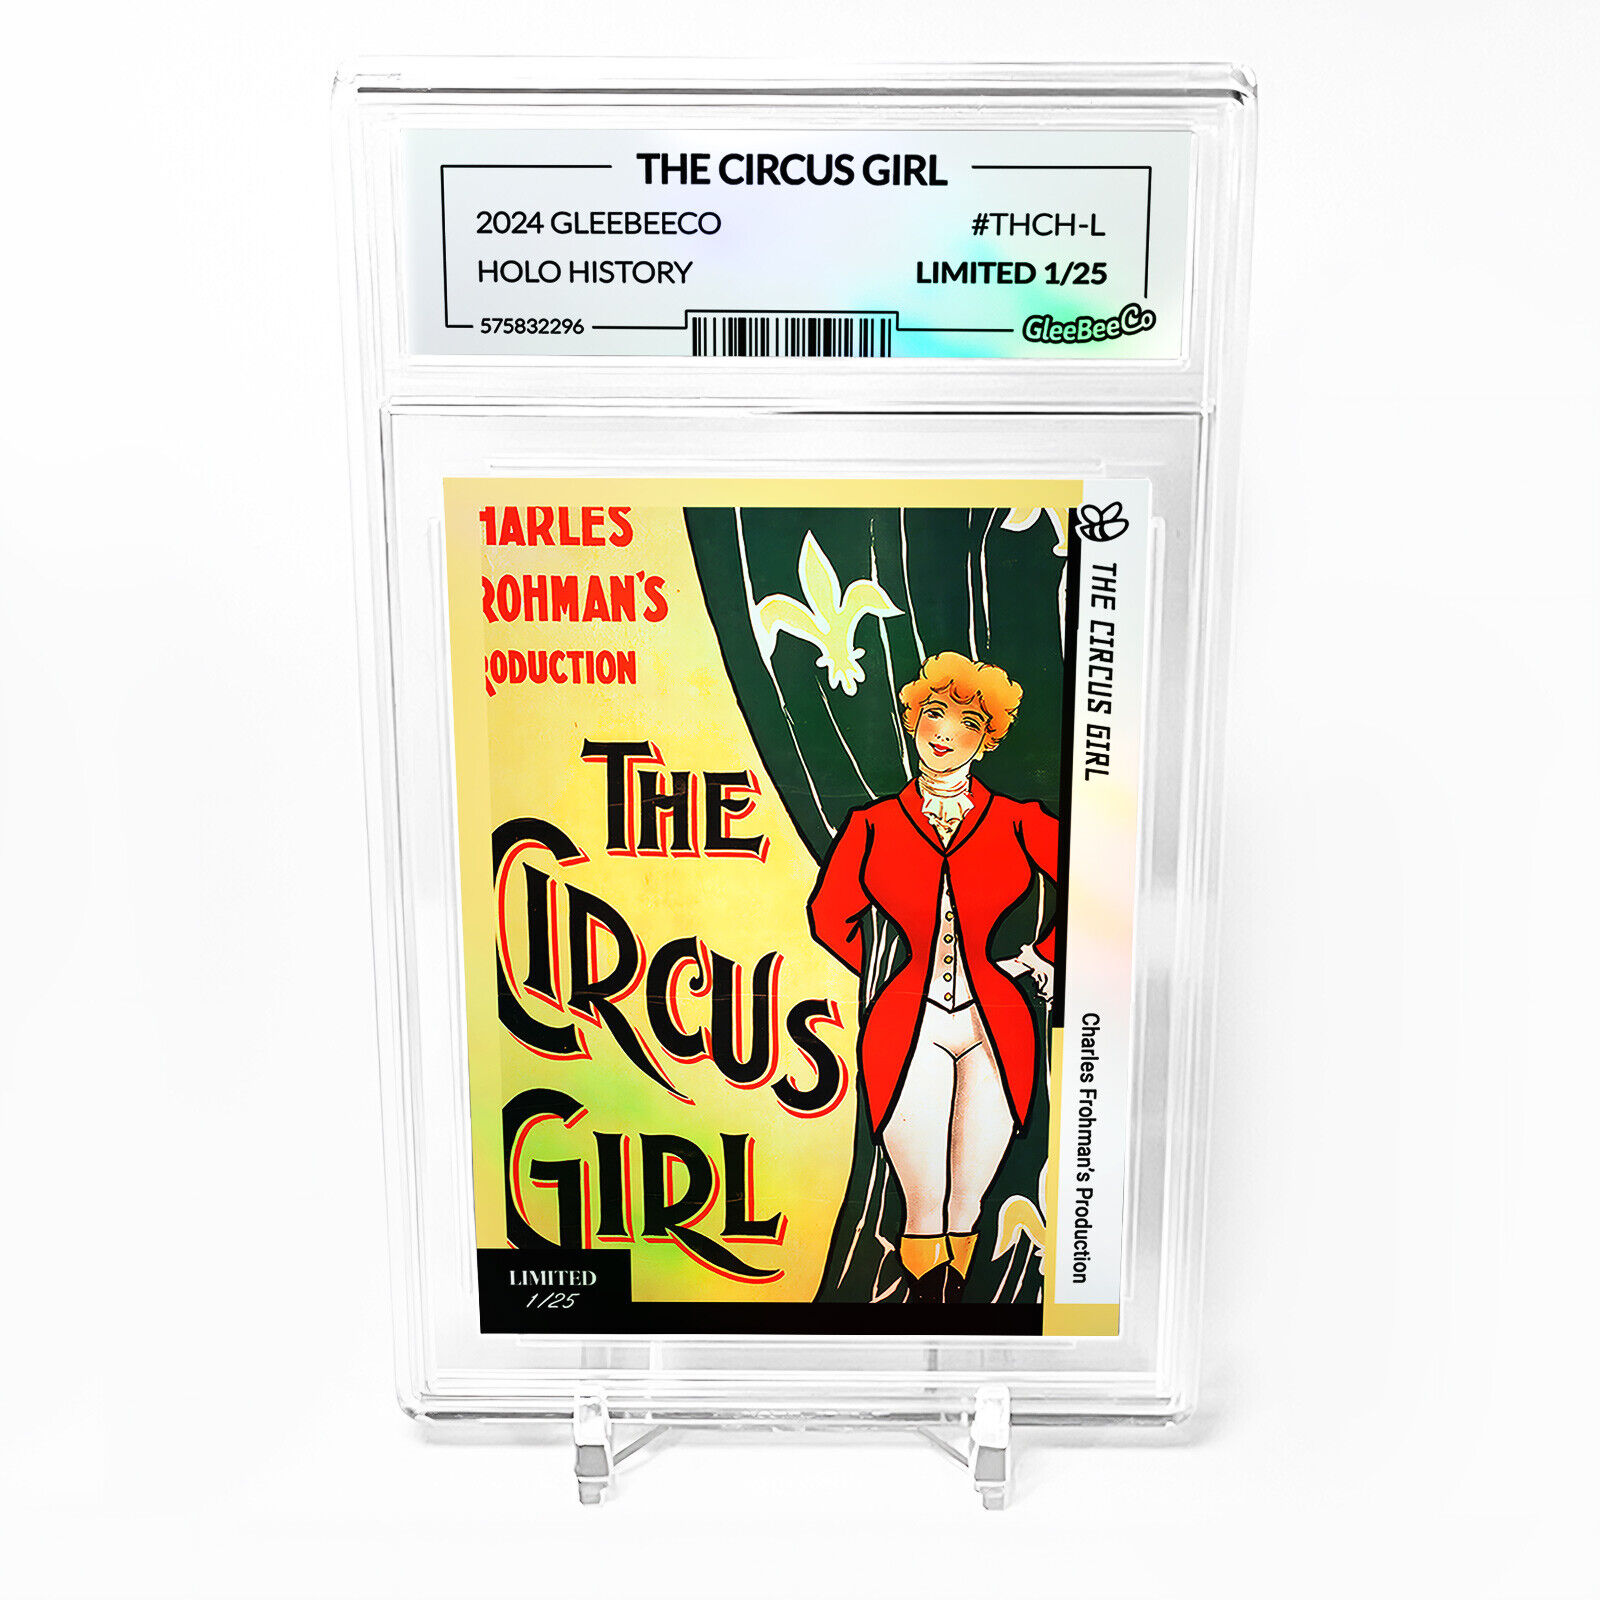 THE CIRCUS GIRL Holographic Art Card 2024 GleeBeeCo Slabbed #THCH-L Only /25